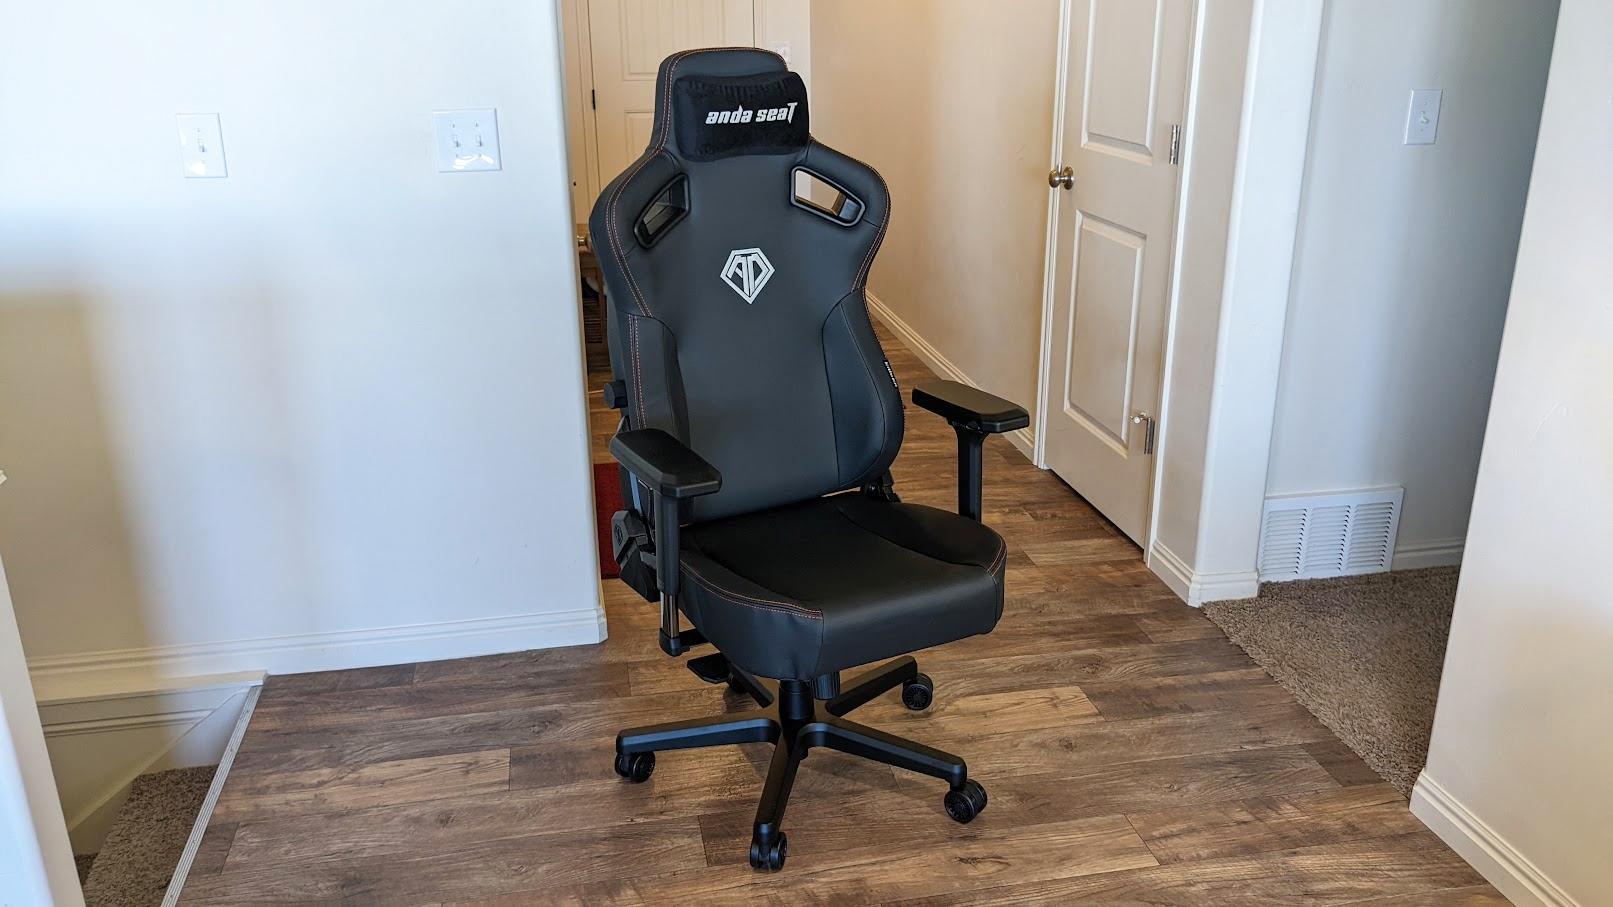 Anda Seat Kaiser 3 Gaming Chair Complete Chair